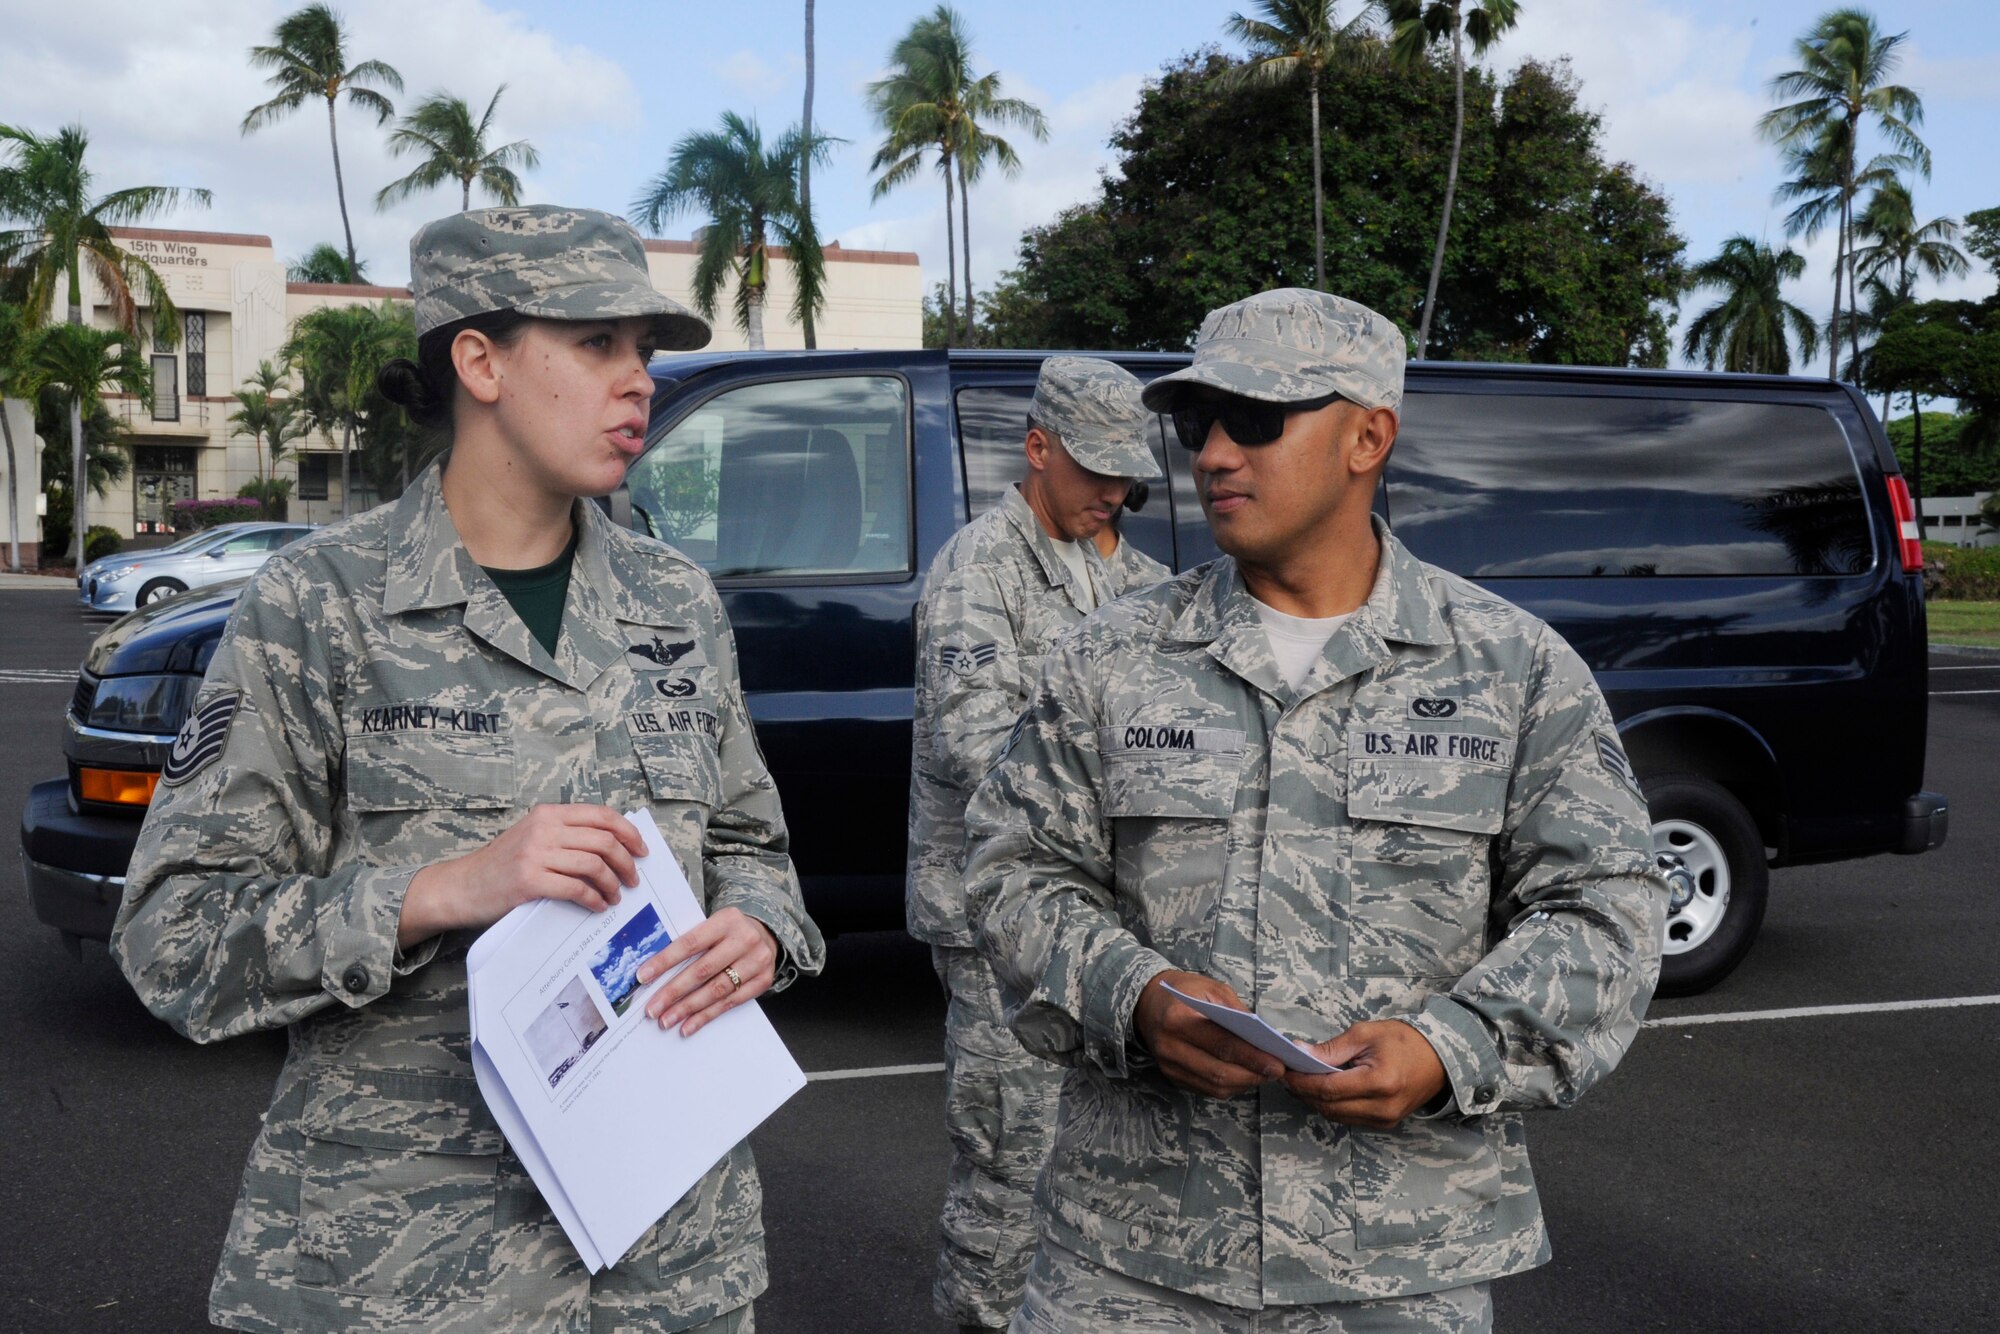 U.S. Air Force Tech. Sgt. Christine Kearney-Kurt, a historian for the Air Force Reserve 624th Regional Support Group, explains the size of the base in the 1940s compared to present day with Senior Airman Robert Coloma during a battlefield staff ride at Joint Base Pearl Harbor-Hickam, Hawaii, Dec. 3, 2017. The tour focused on the remnants of war from 76 years ago during the Dec. 7, 1941, attack at Hickam Field when America was launched into World War II. (U.S. Air Force photo by Master Sgt. Theanne Herrmann)